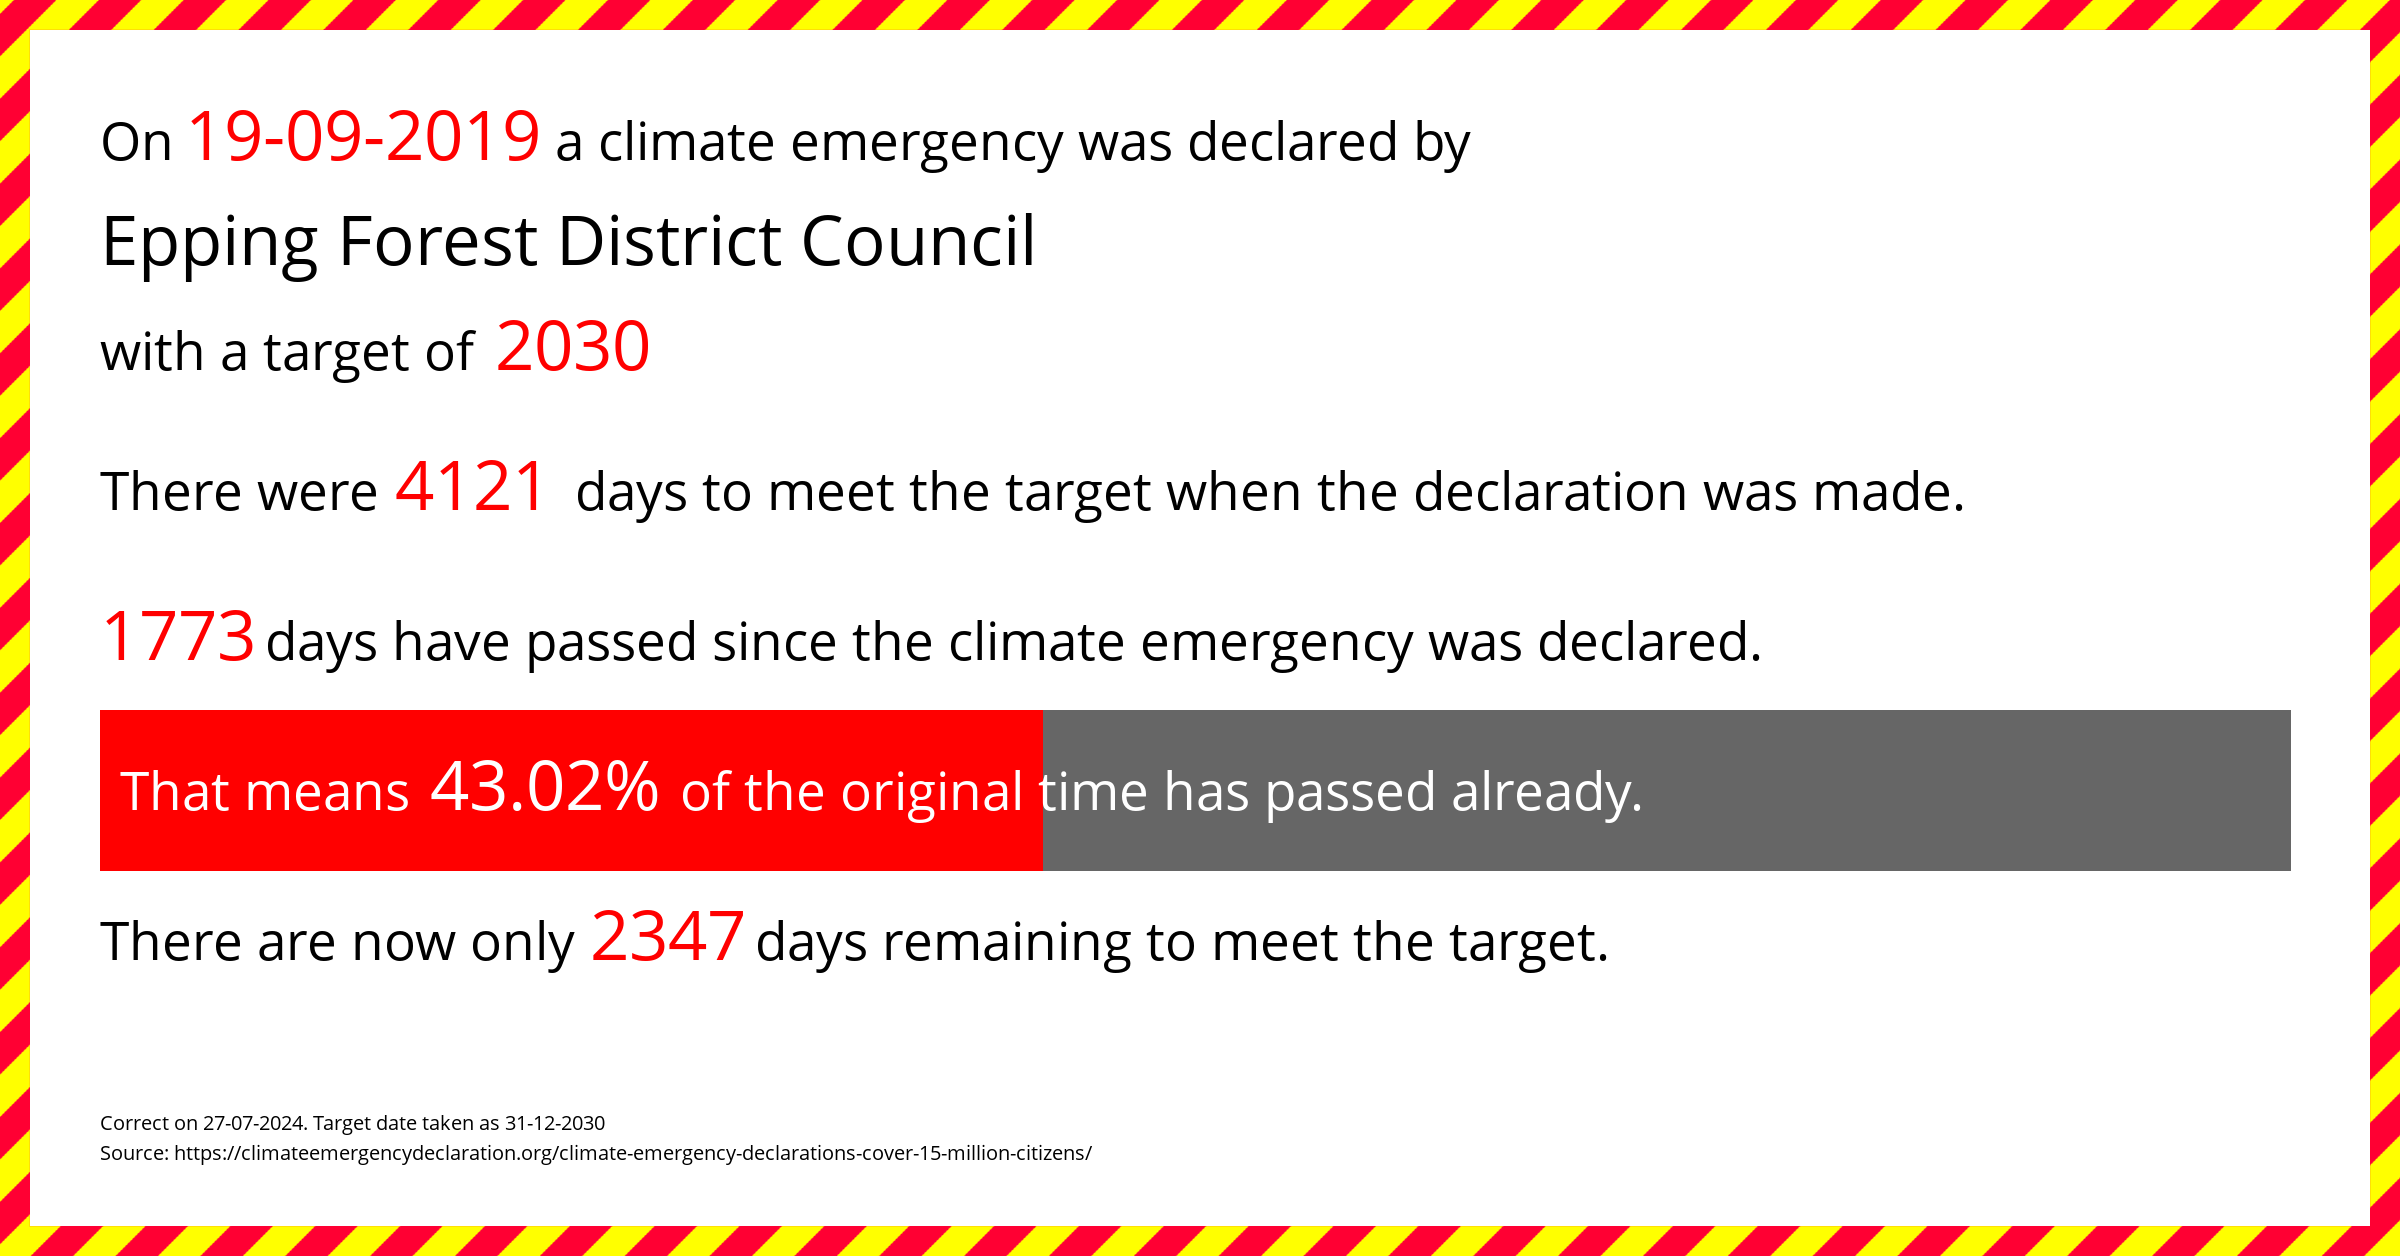 Epping Forest District Council declared a Climate emergency on Thursday 19th September 2019, with a target of 2030.